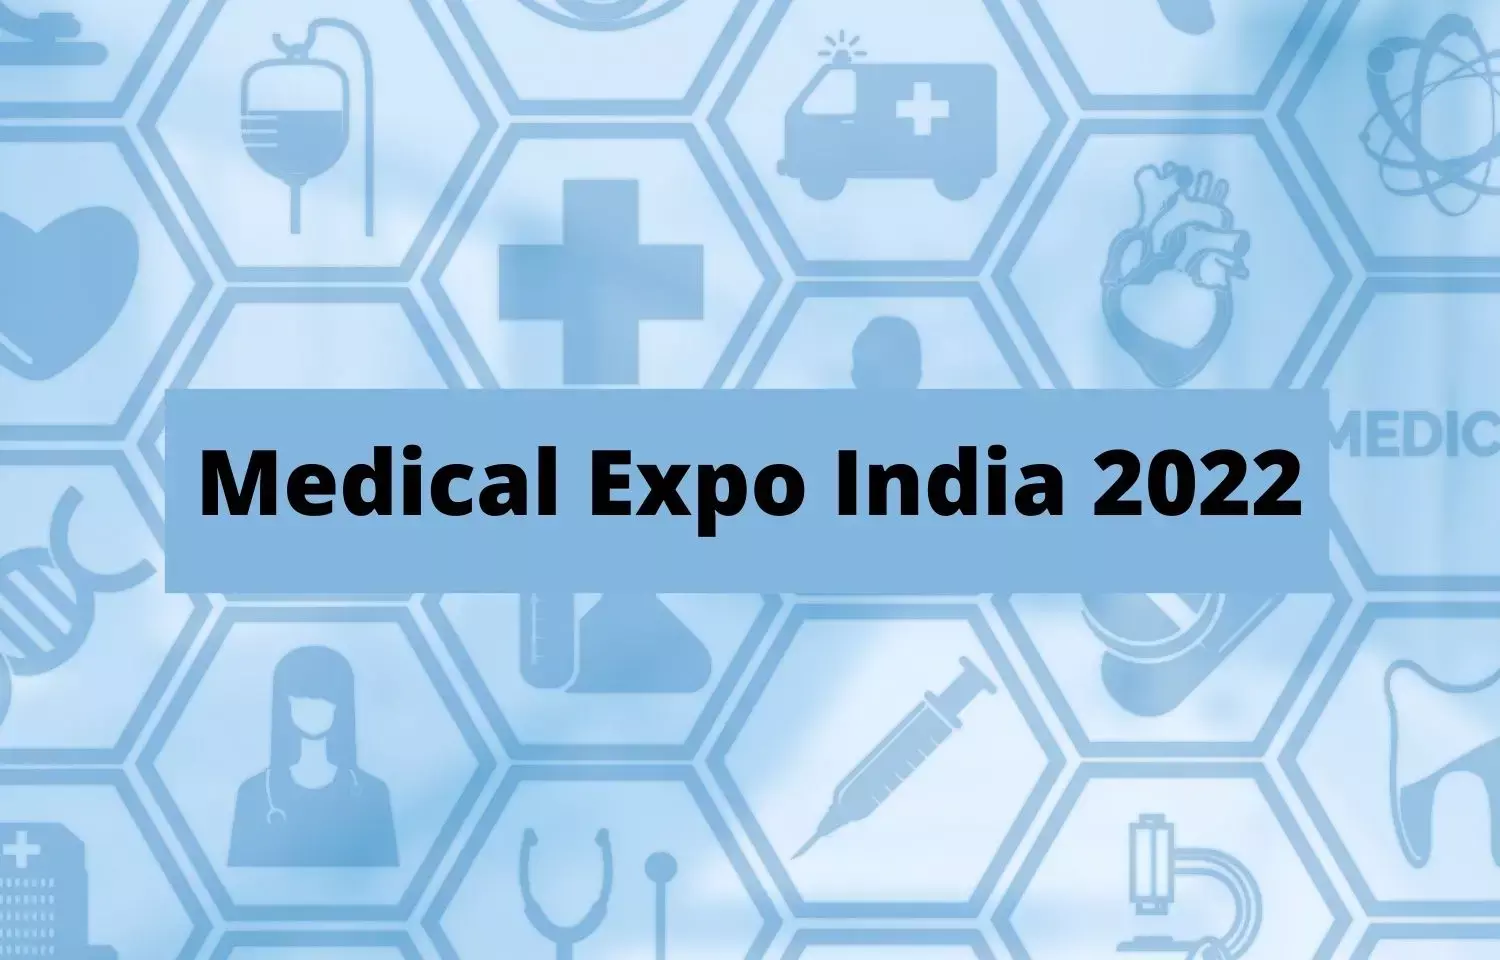 Medical Expo India 2022 to be held in Kolkata from June 24